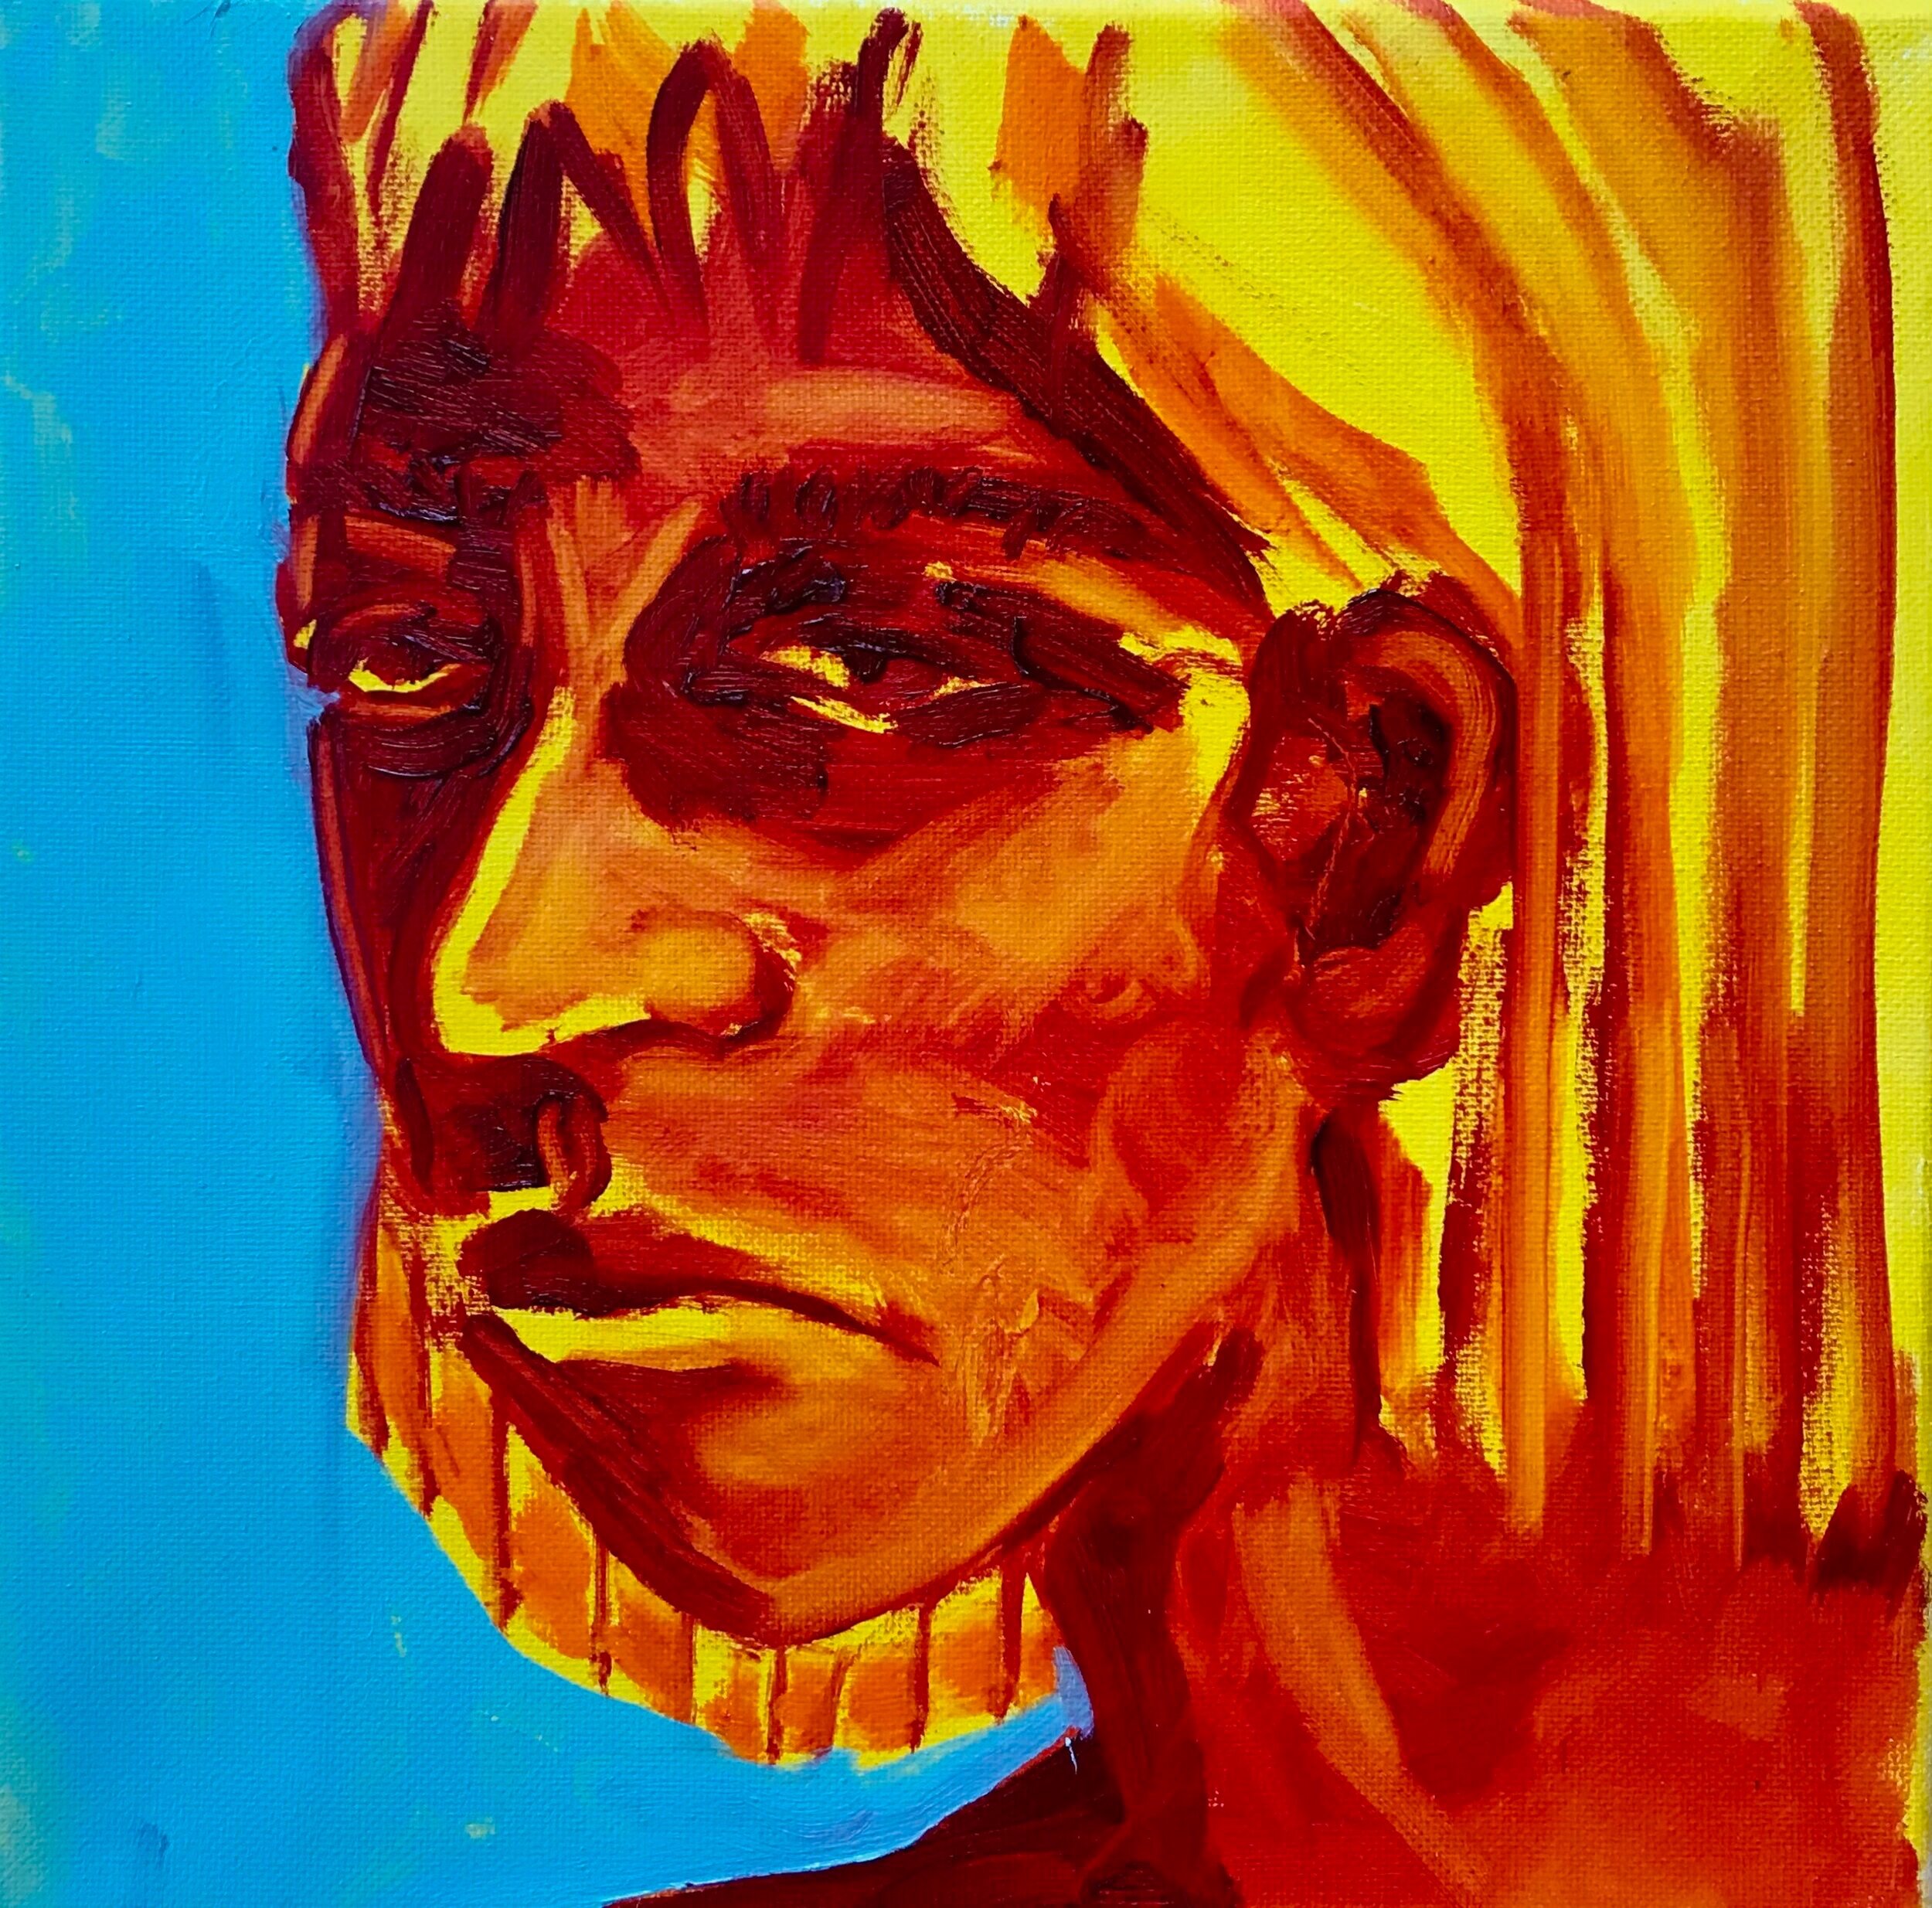  Untitled Portrait  Oil Paint on Canvas  2021  10 inches x 10 inches 